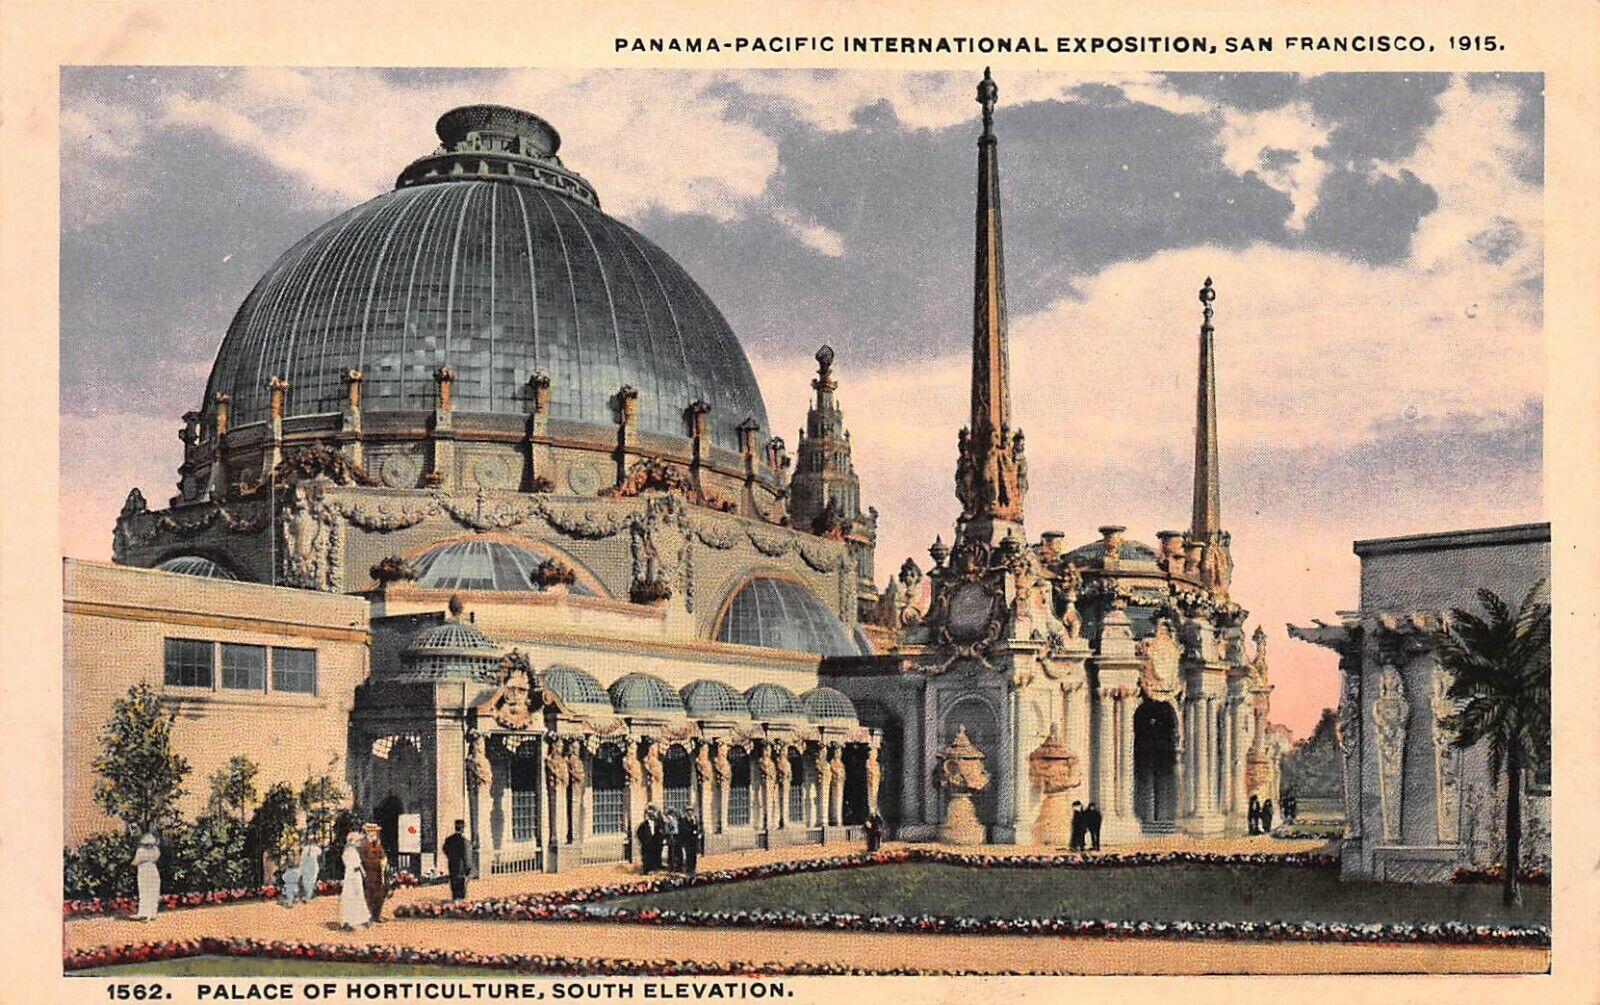 Palace of Horticulture, 1915 Panama-Pacific Expo, San Francisco, CA., Postcard